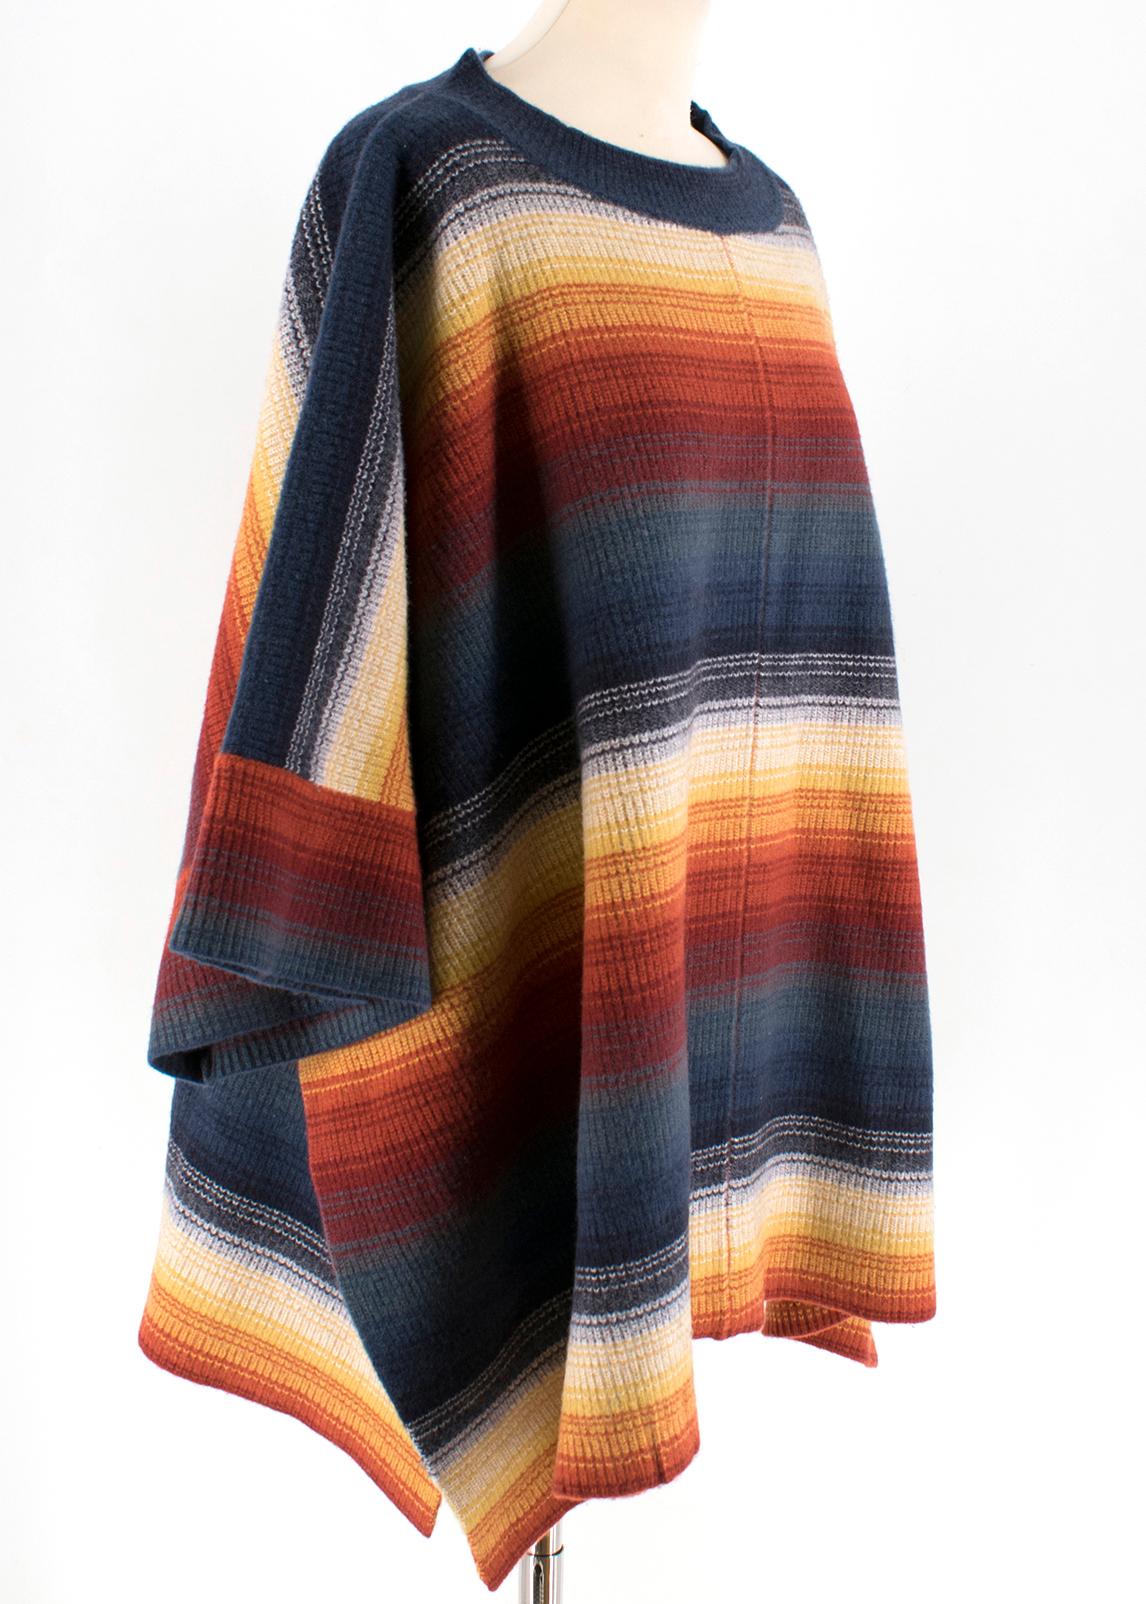 Chloe Stripe Felted Wool & Cashmere Poncho

Oversized poncho
Colourful serape stripes  Round neck
Elbow sleeves
Mid-Weight material

Please note, these items are pre-owned and may show some signs of storage, even when unworn and unused. This is